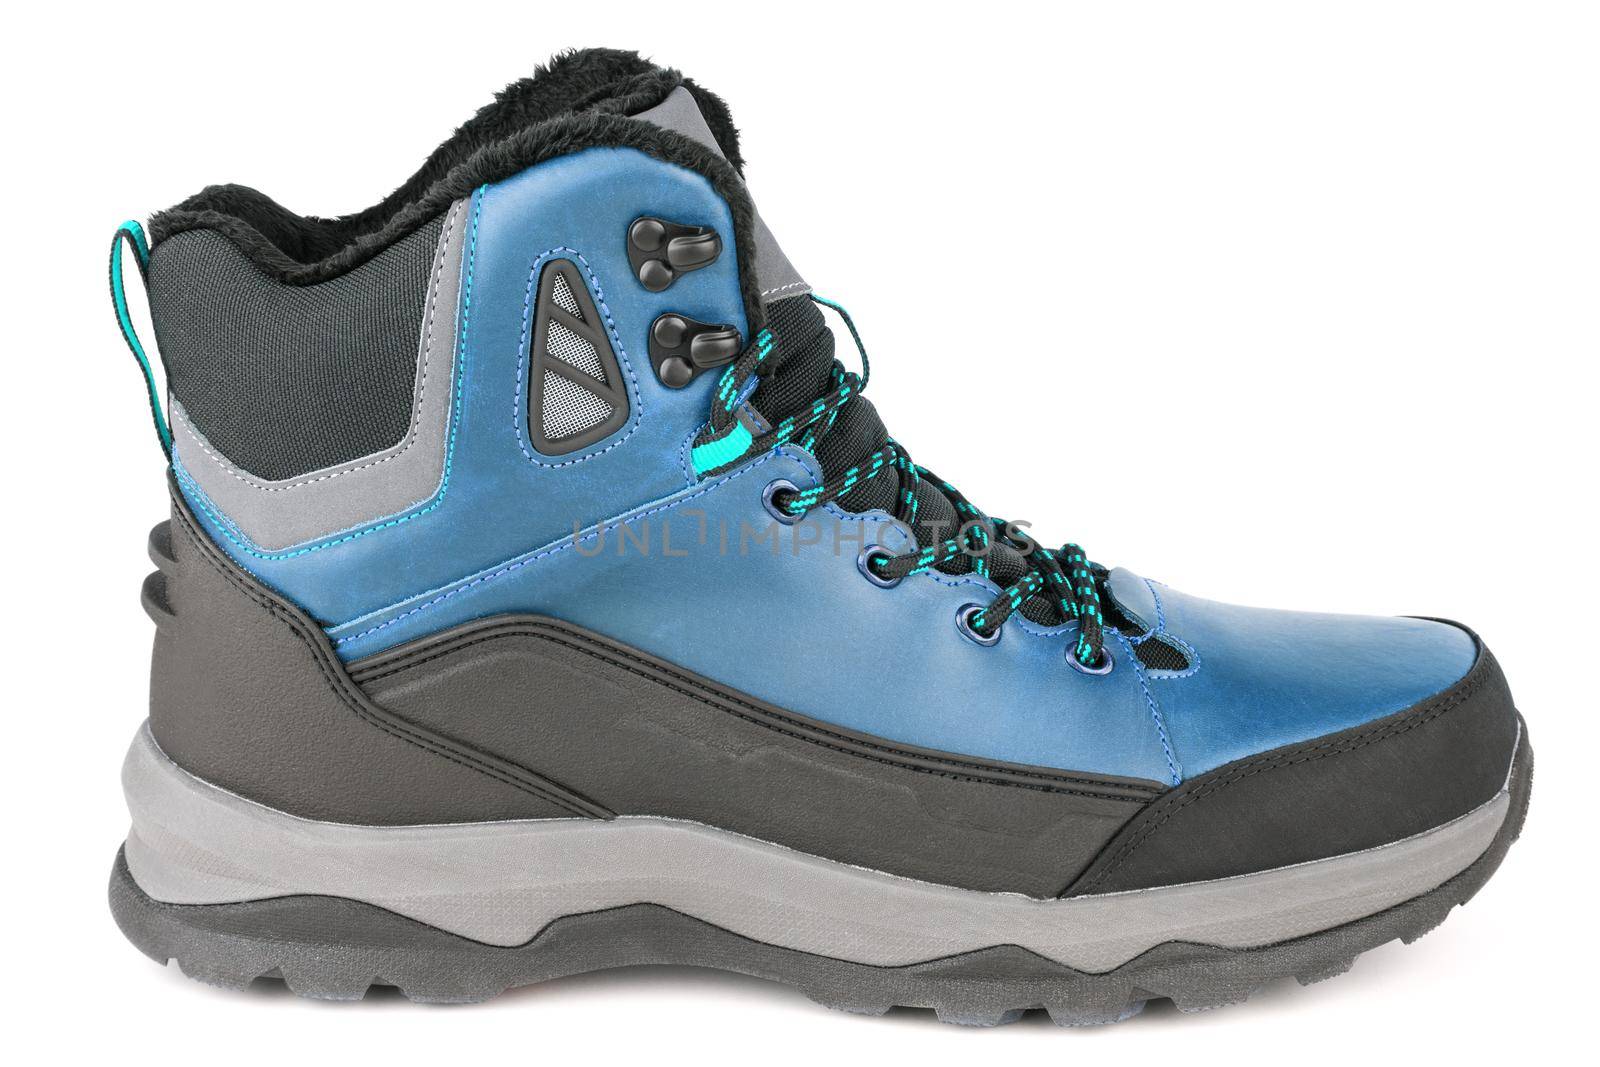 blue insulated winter warm three quarter sneaker or boot isolated on white background, side view